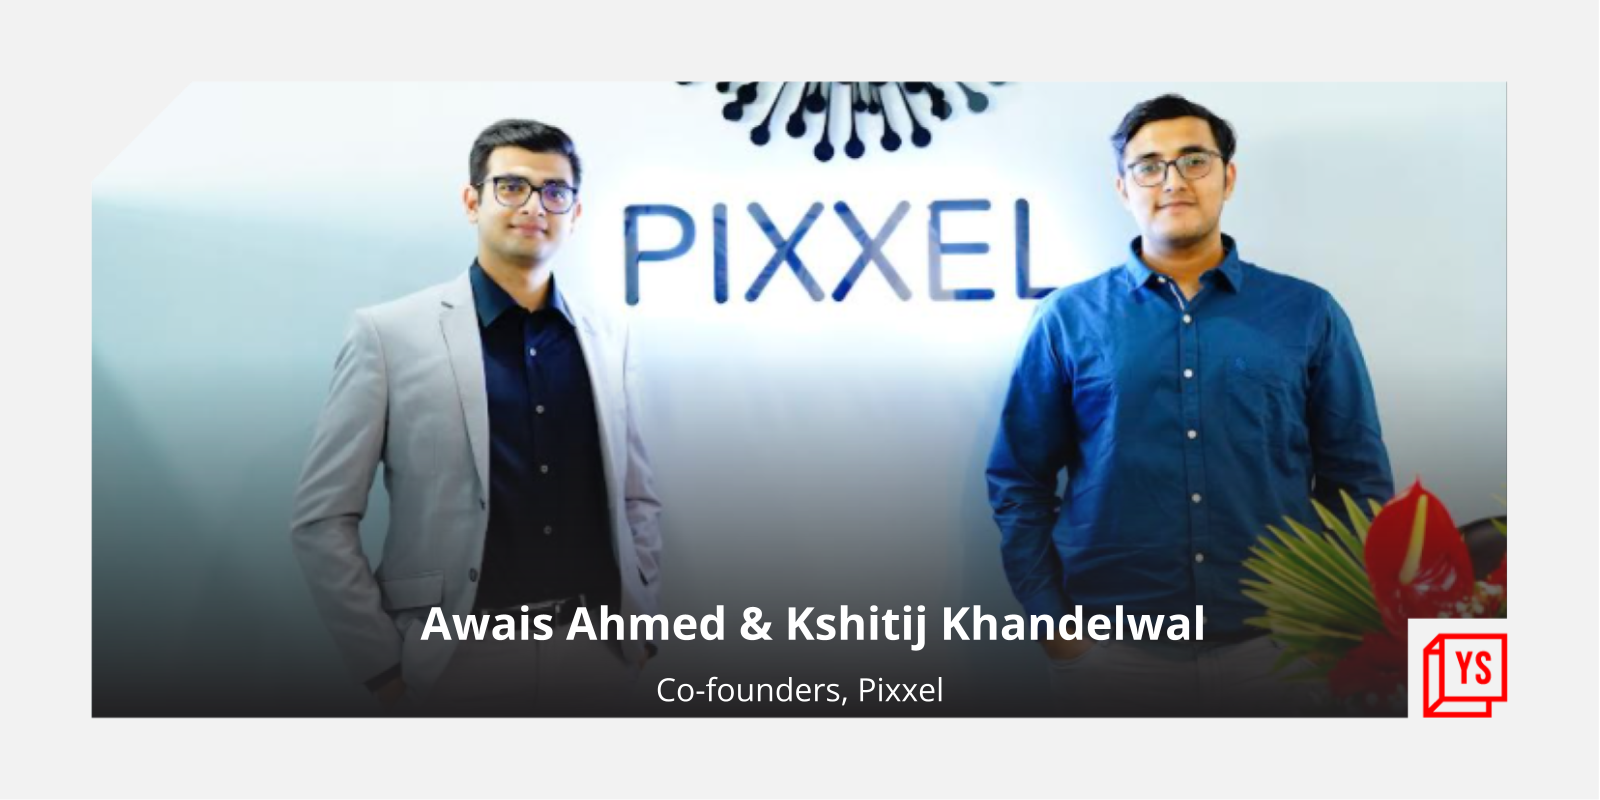 [Funding alert] Spacetech startup Pixxel raises $25M in Series A led by Radical Ventures